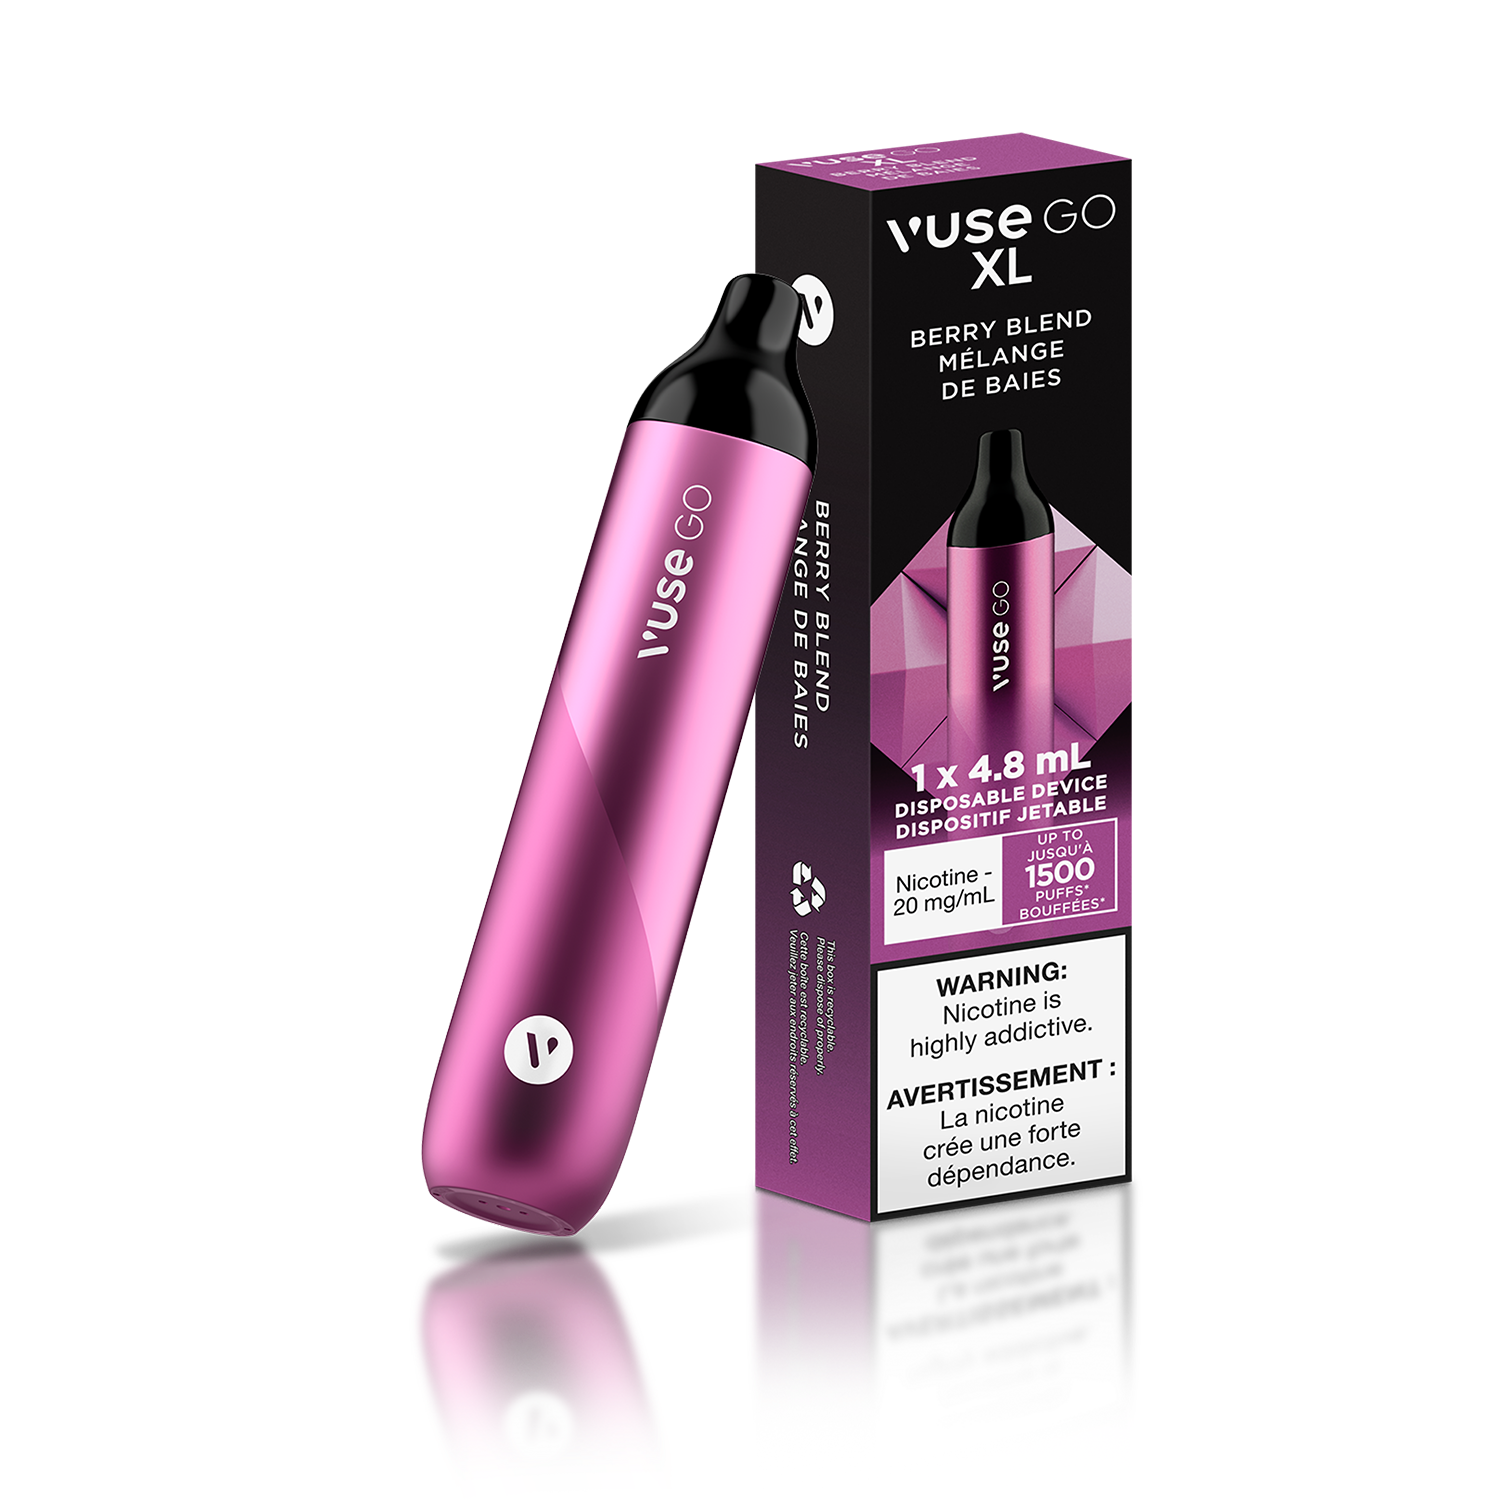 Vuse GO XL Vuse GO XL Berry Blend (Excise Taxed)